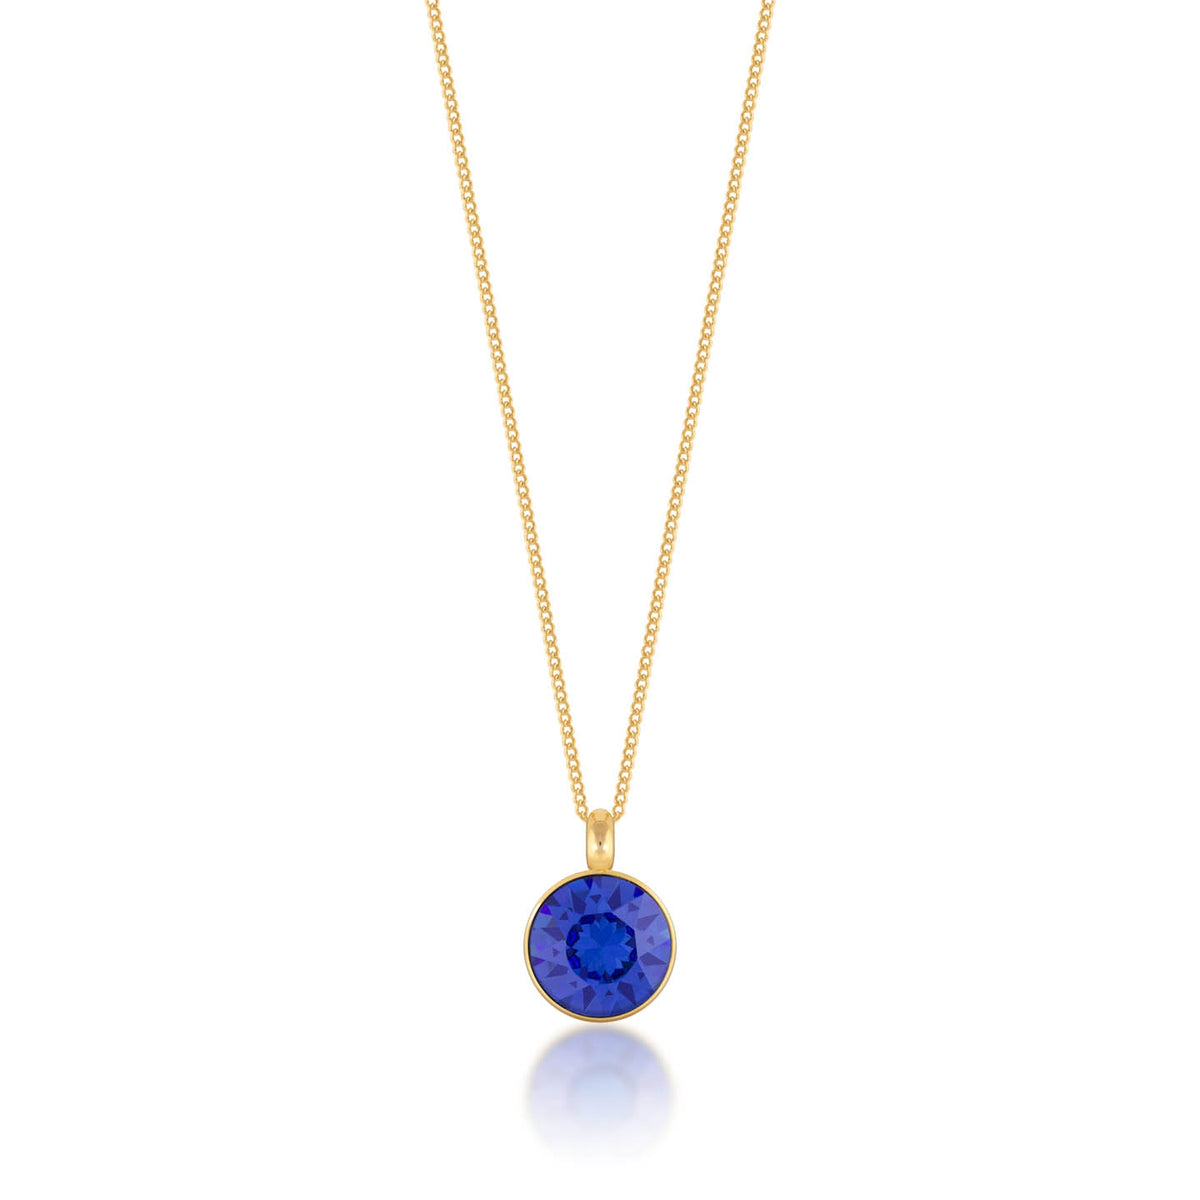 Bella Pendant Necklace with Blue Sapphire Round Crystals from Swarovski Gold Plated - Ed Heart